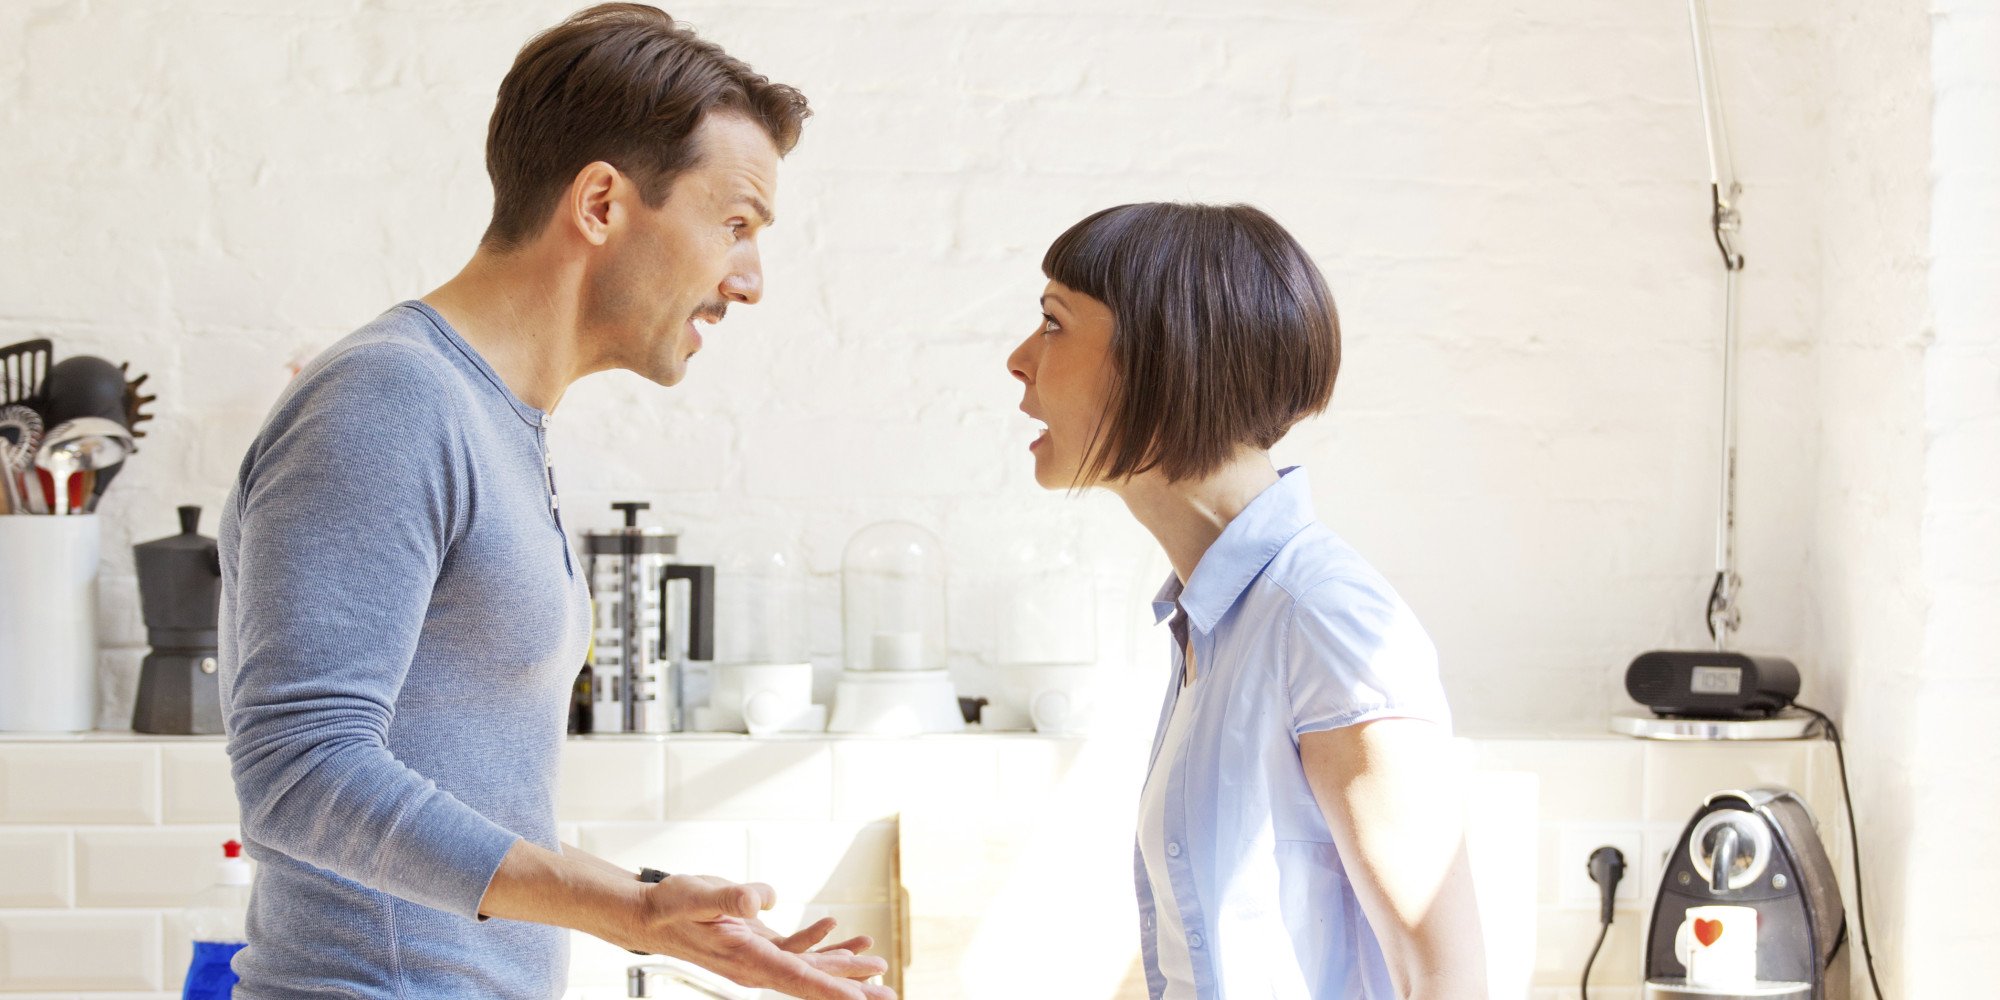 Couple arguing in a kitchen